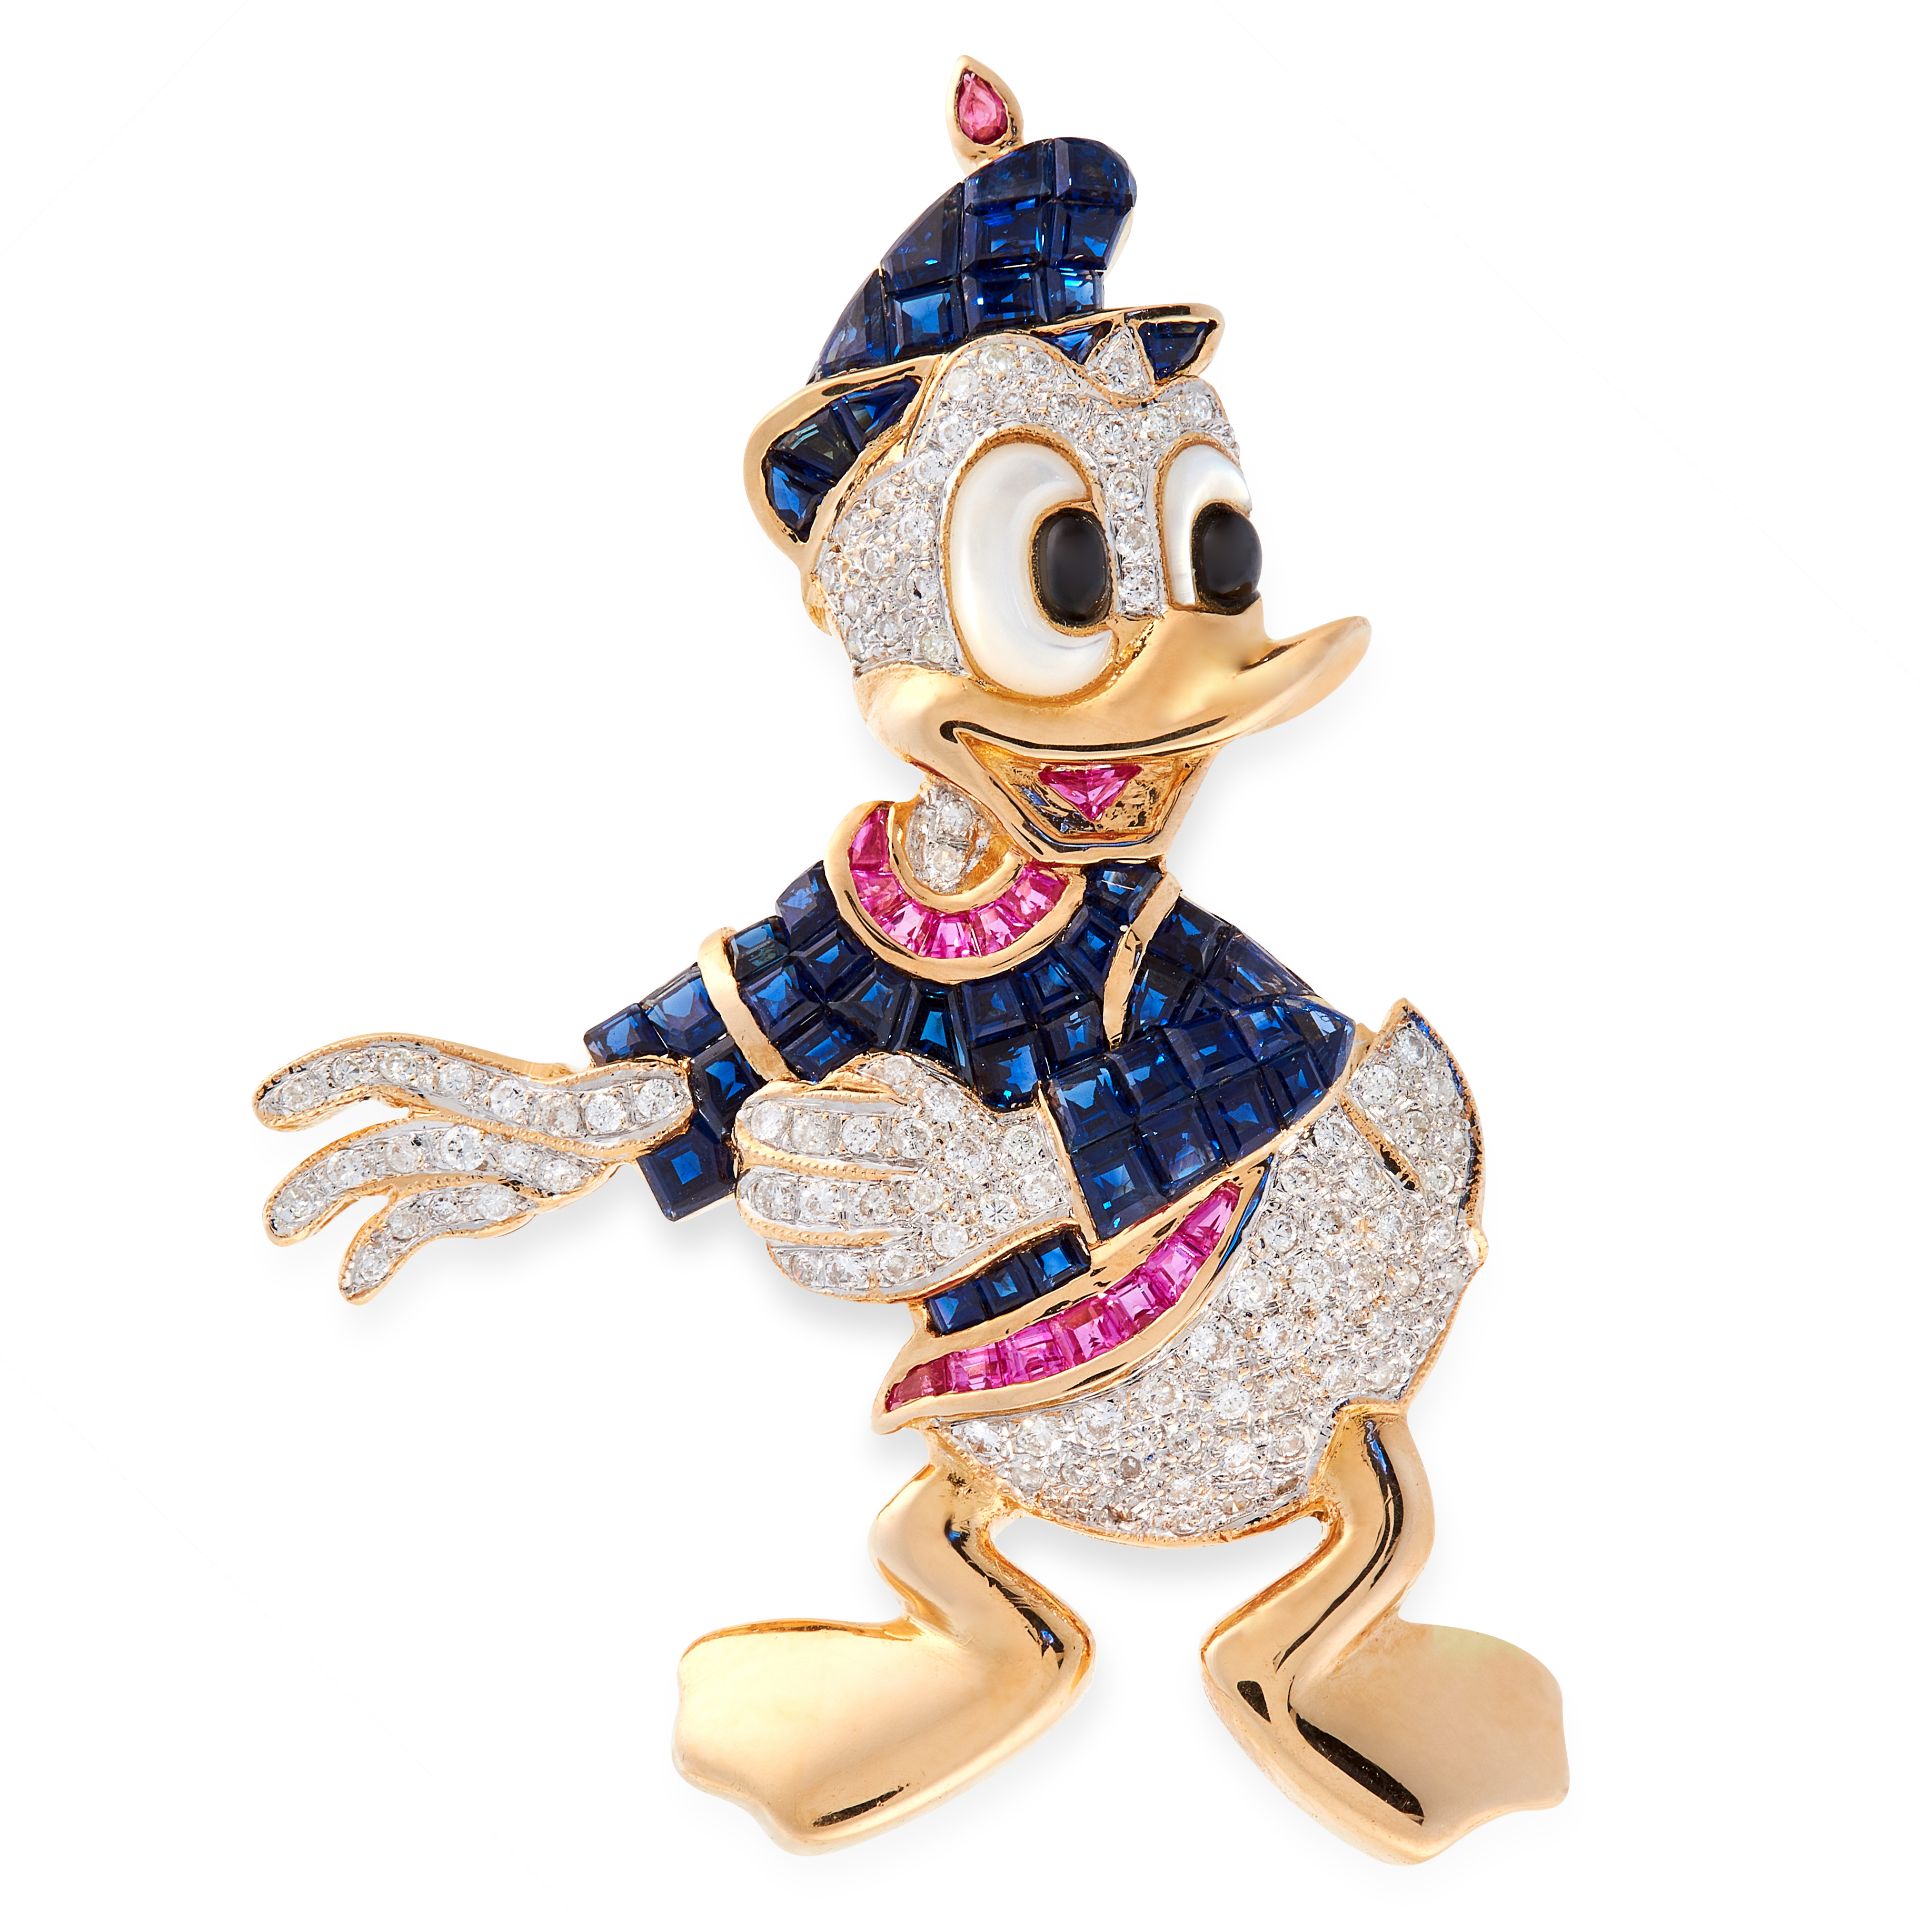 A SAPPHIRE, RUBY AND DIAMOND DONALD DUCK BROOCH in 18ct yellow gold, designed to depict Disney's